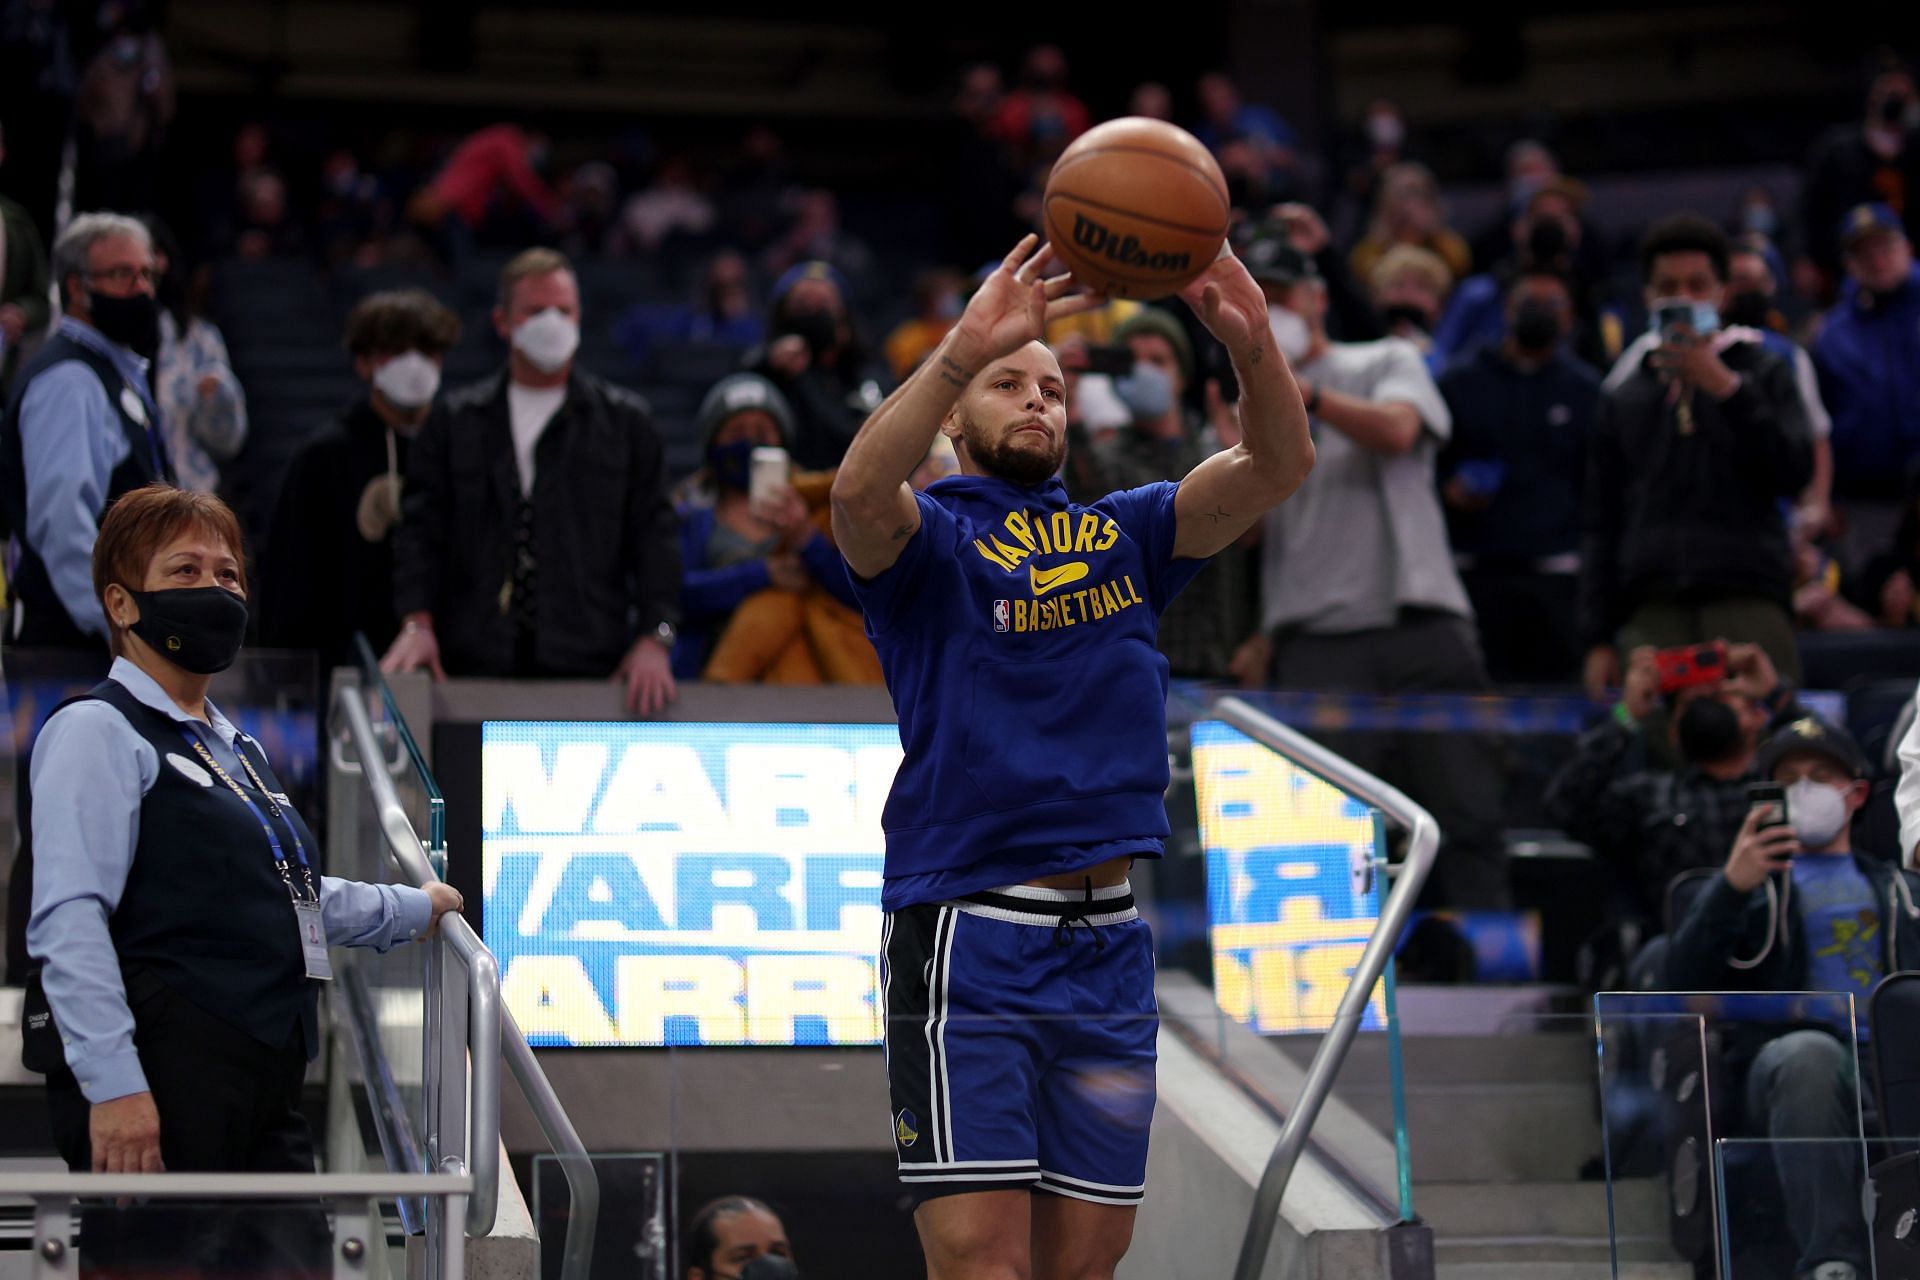 Steph Curry attempts a shot from the stands